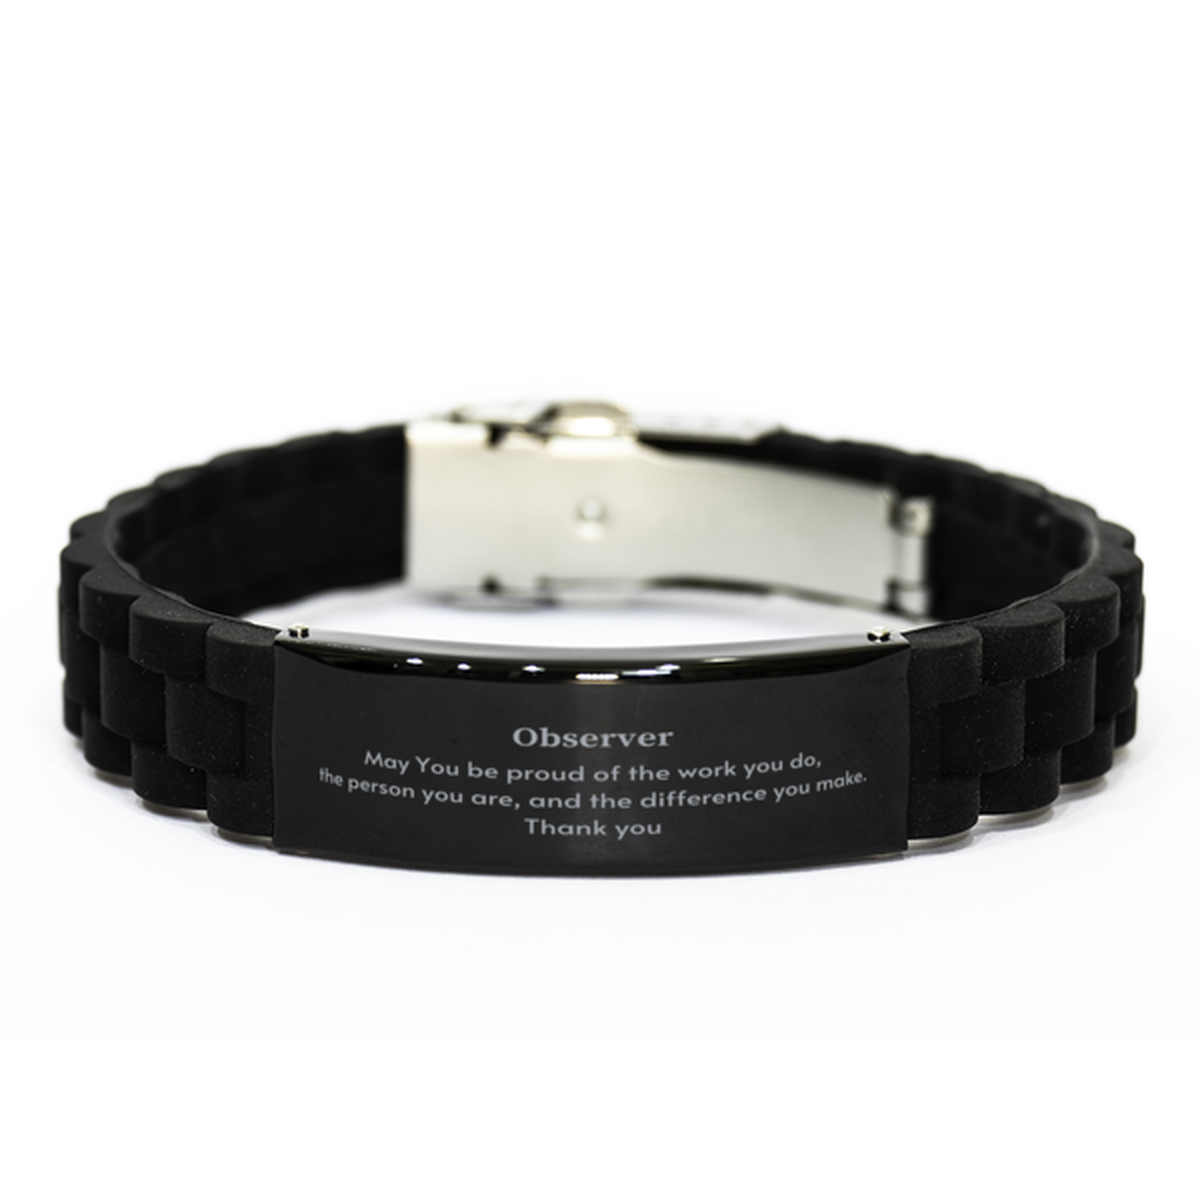 Heartwarming Black Glidelock Clasp Bracelet Retirement Coworkers Gifts for Observer, Observer May You be proud of the work you do, the person you are Gifts for Boss Men Women Friends